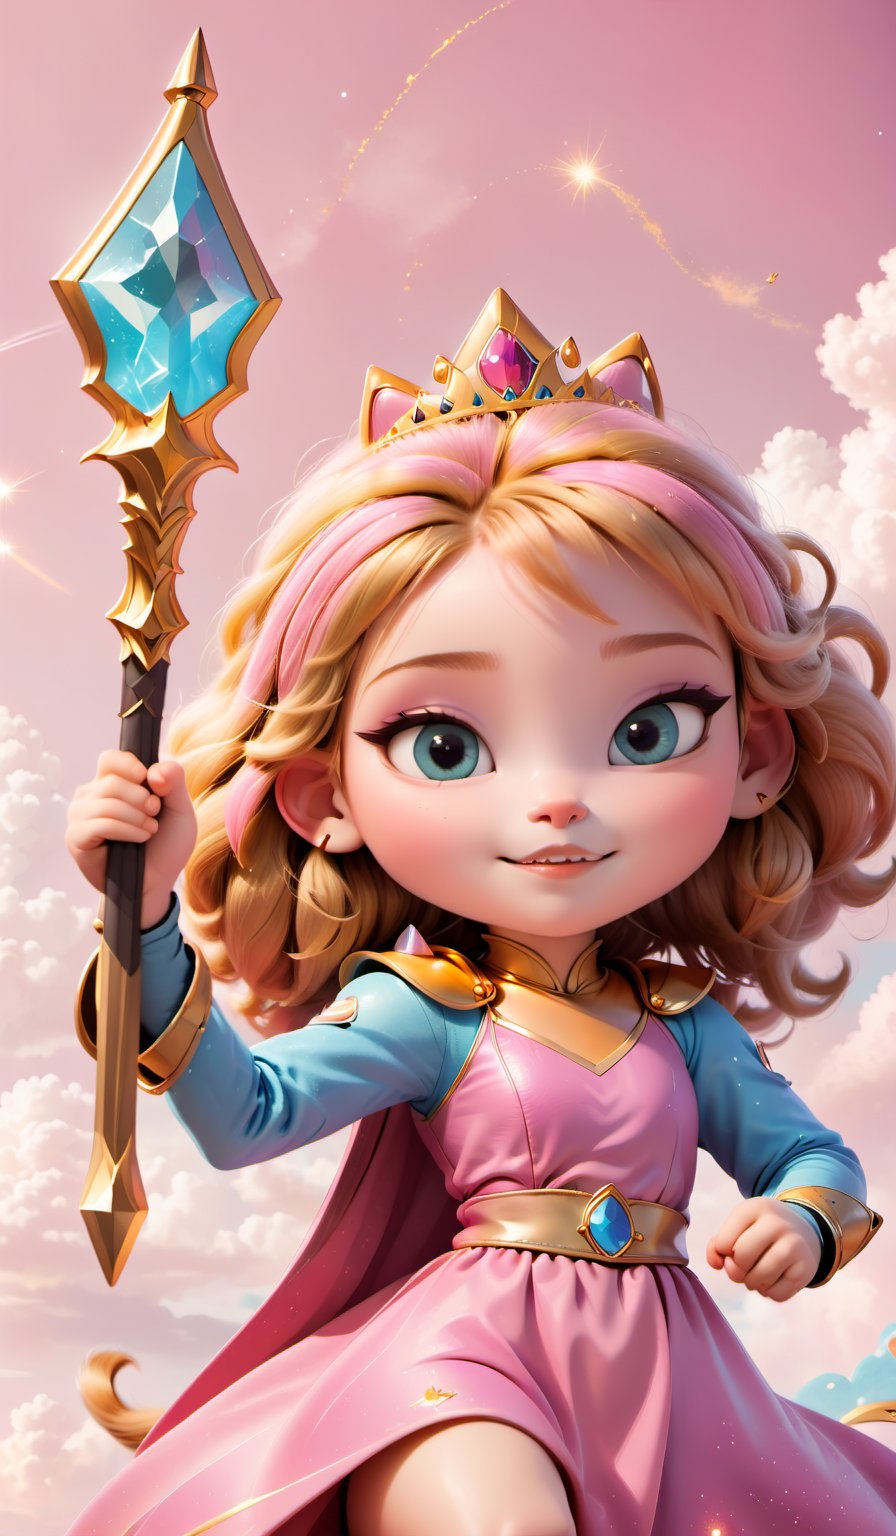  Princess space cat with golden sword in her hands on pink background with white clouds